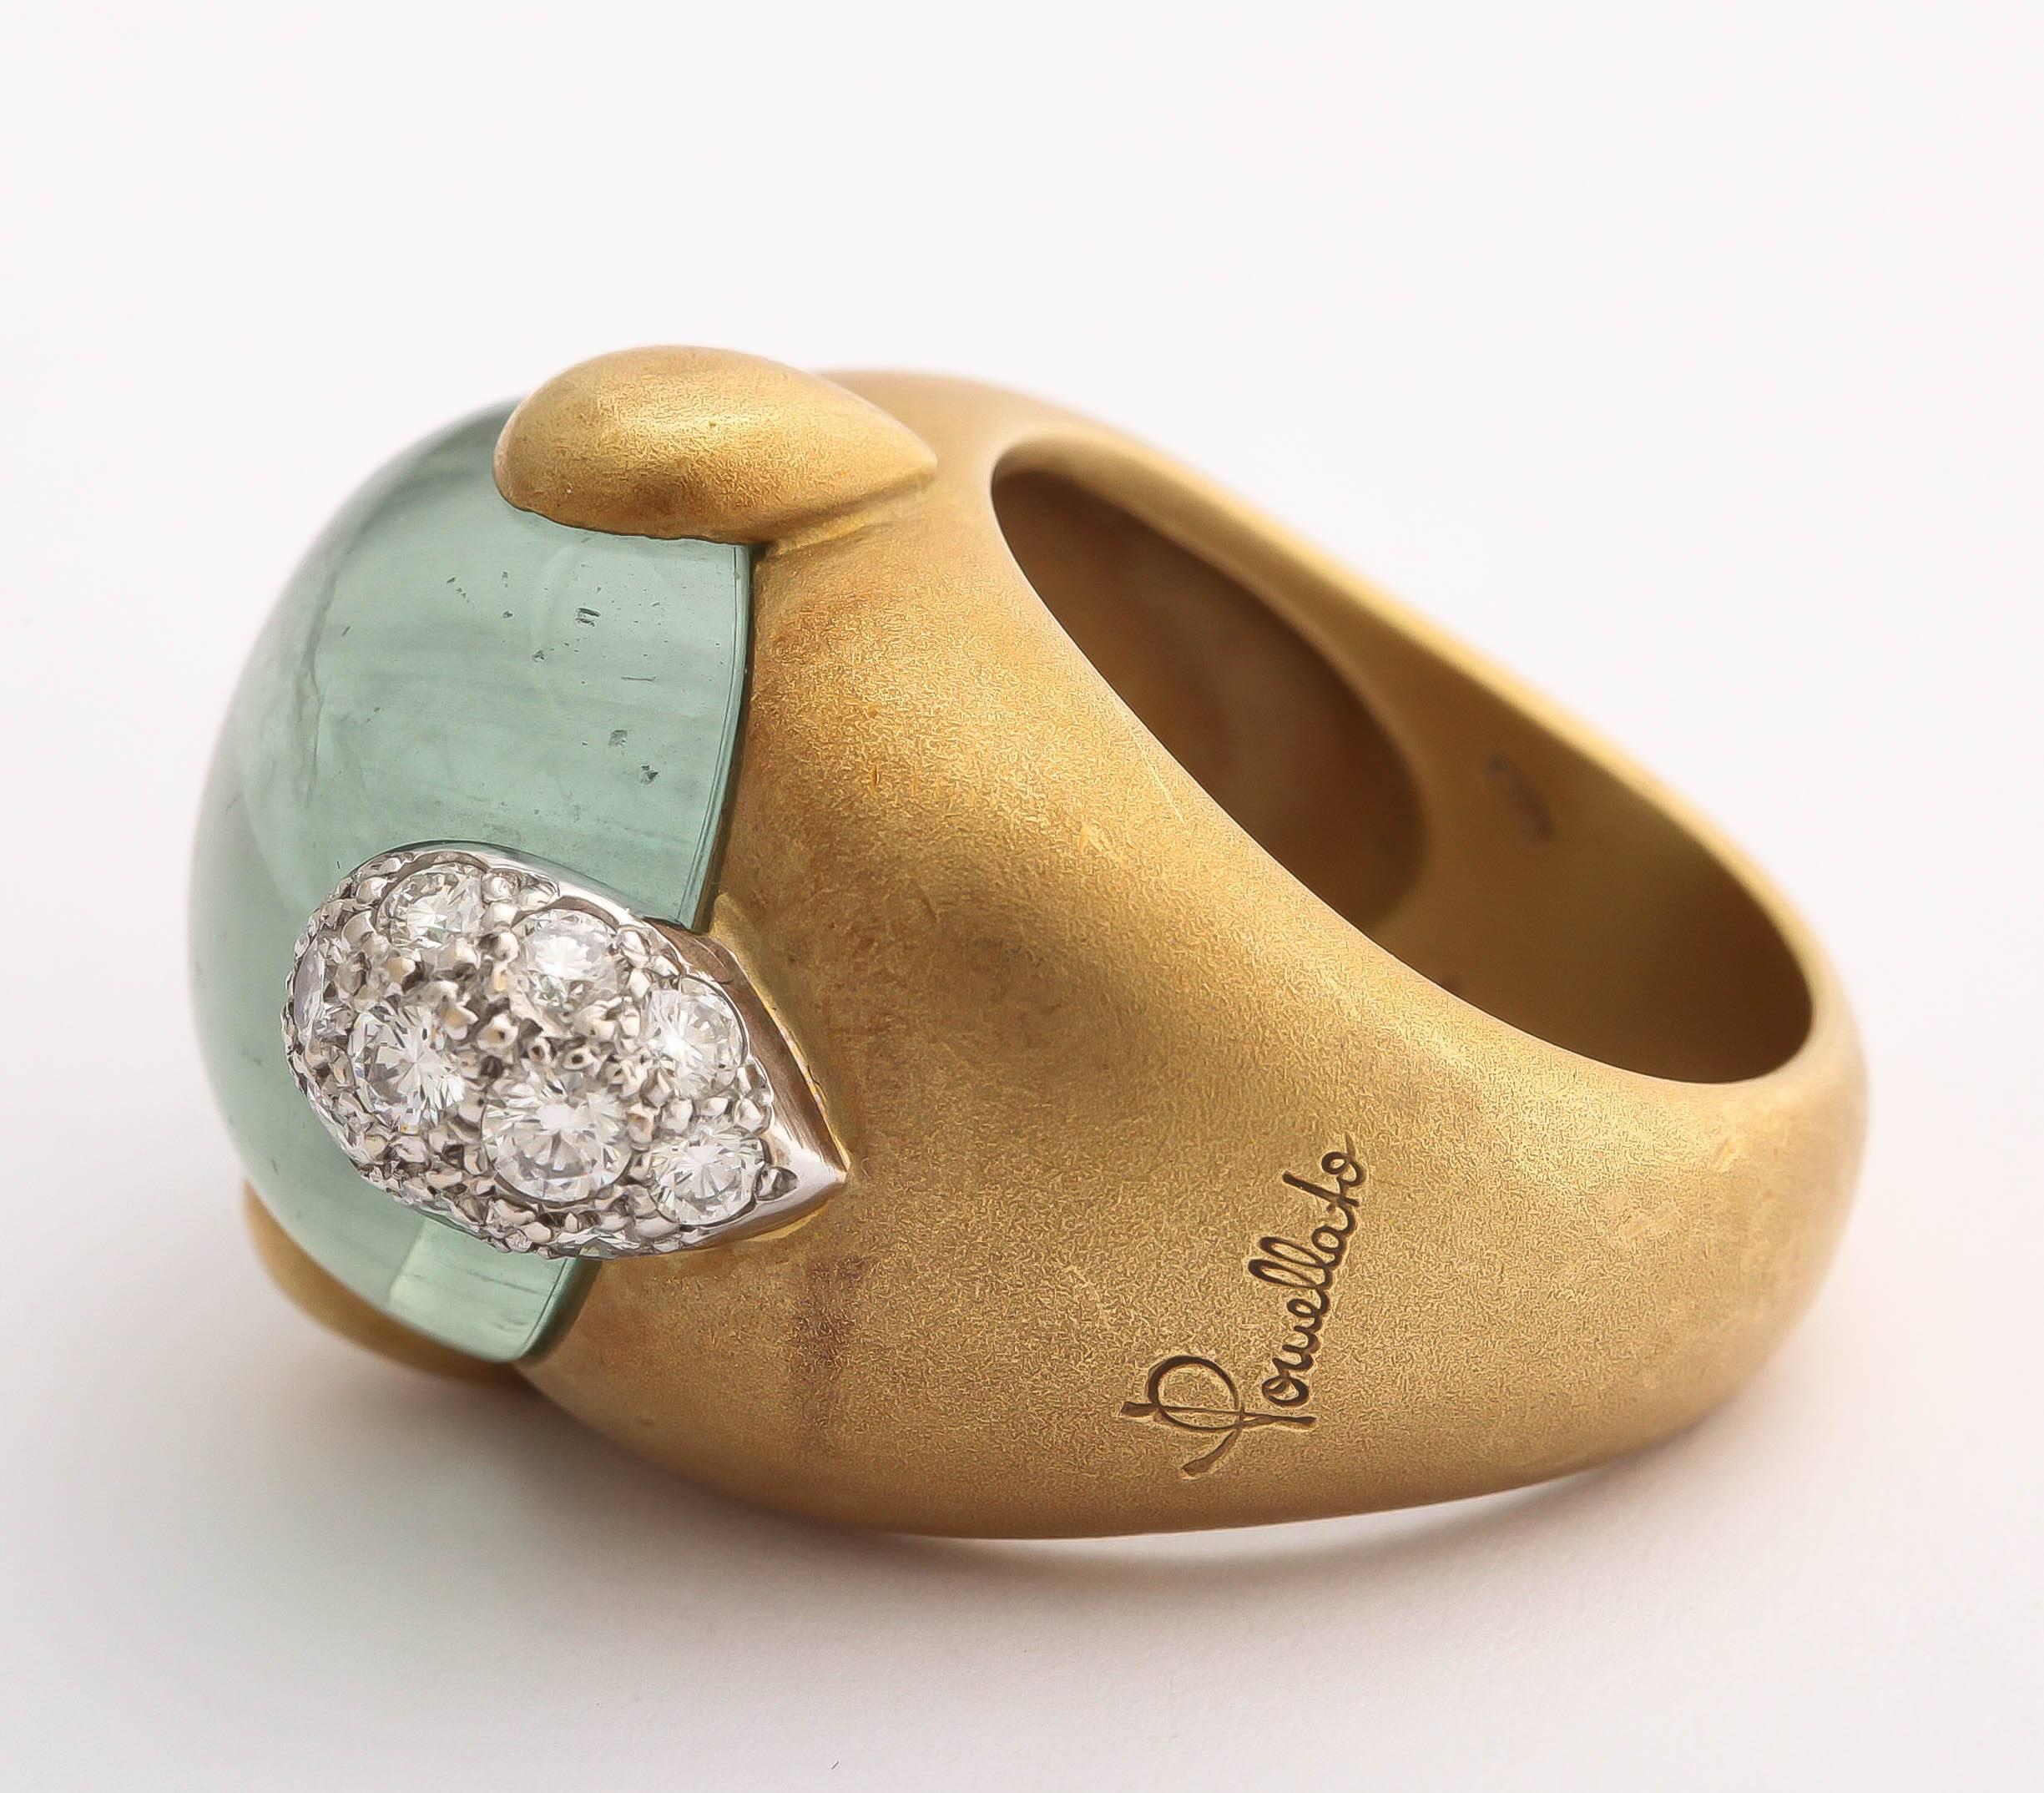 A fabulous significant satin 18kt gold ring with green aquamarine cabochon with diamond inclusion set in white gold. Signed by Pomellato